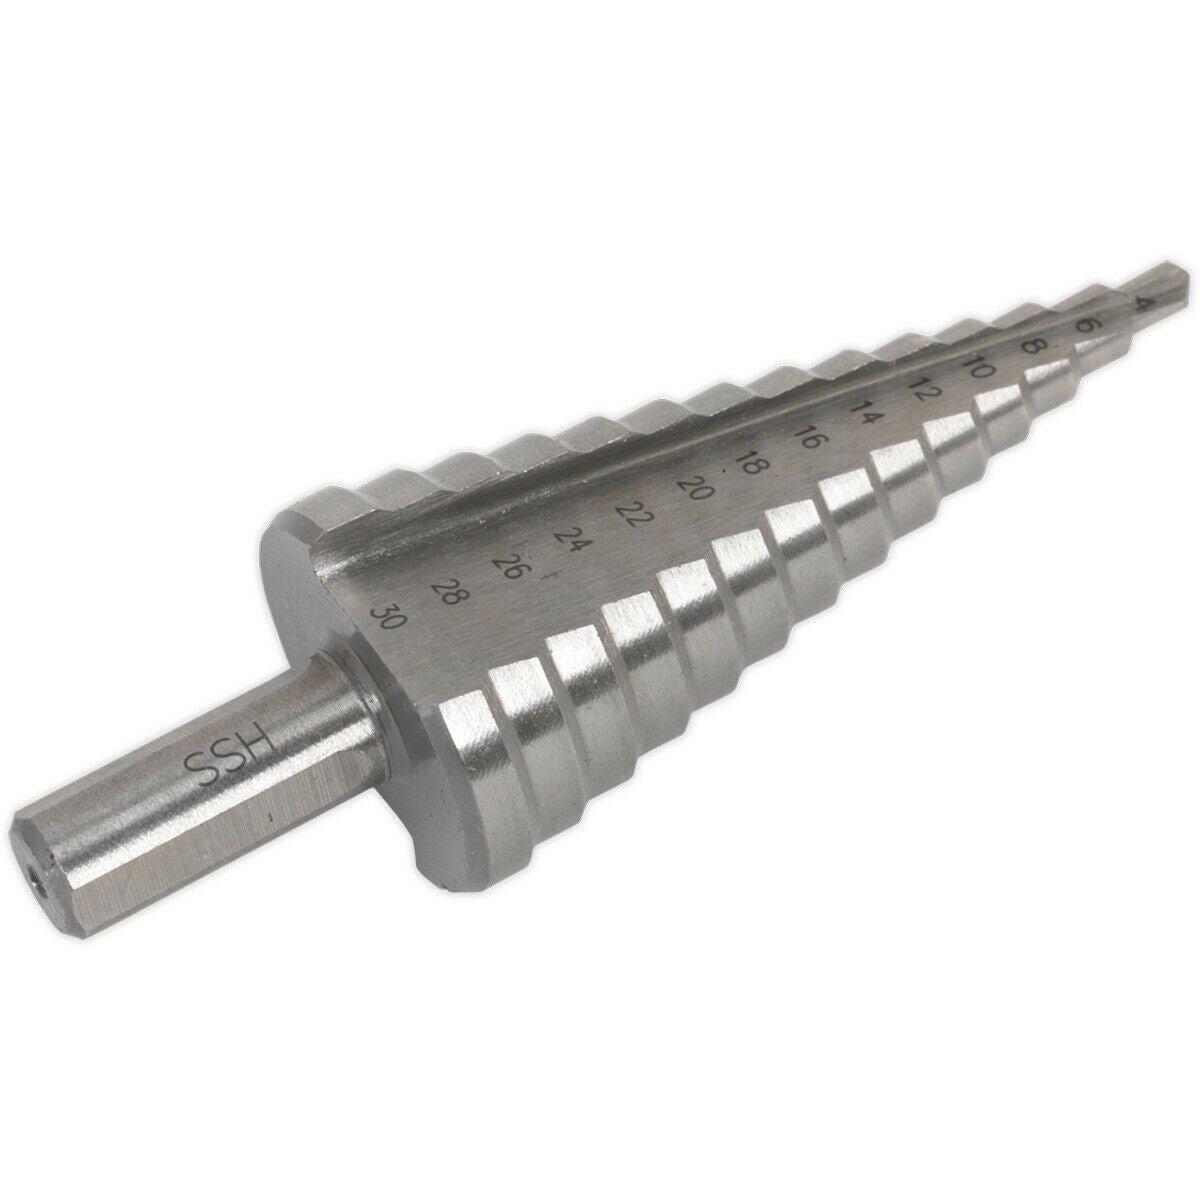 HSS M2 Double Flute Step Drill Bit - 4mm to 30mm - Precision Hole Drilling Bit